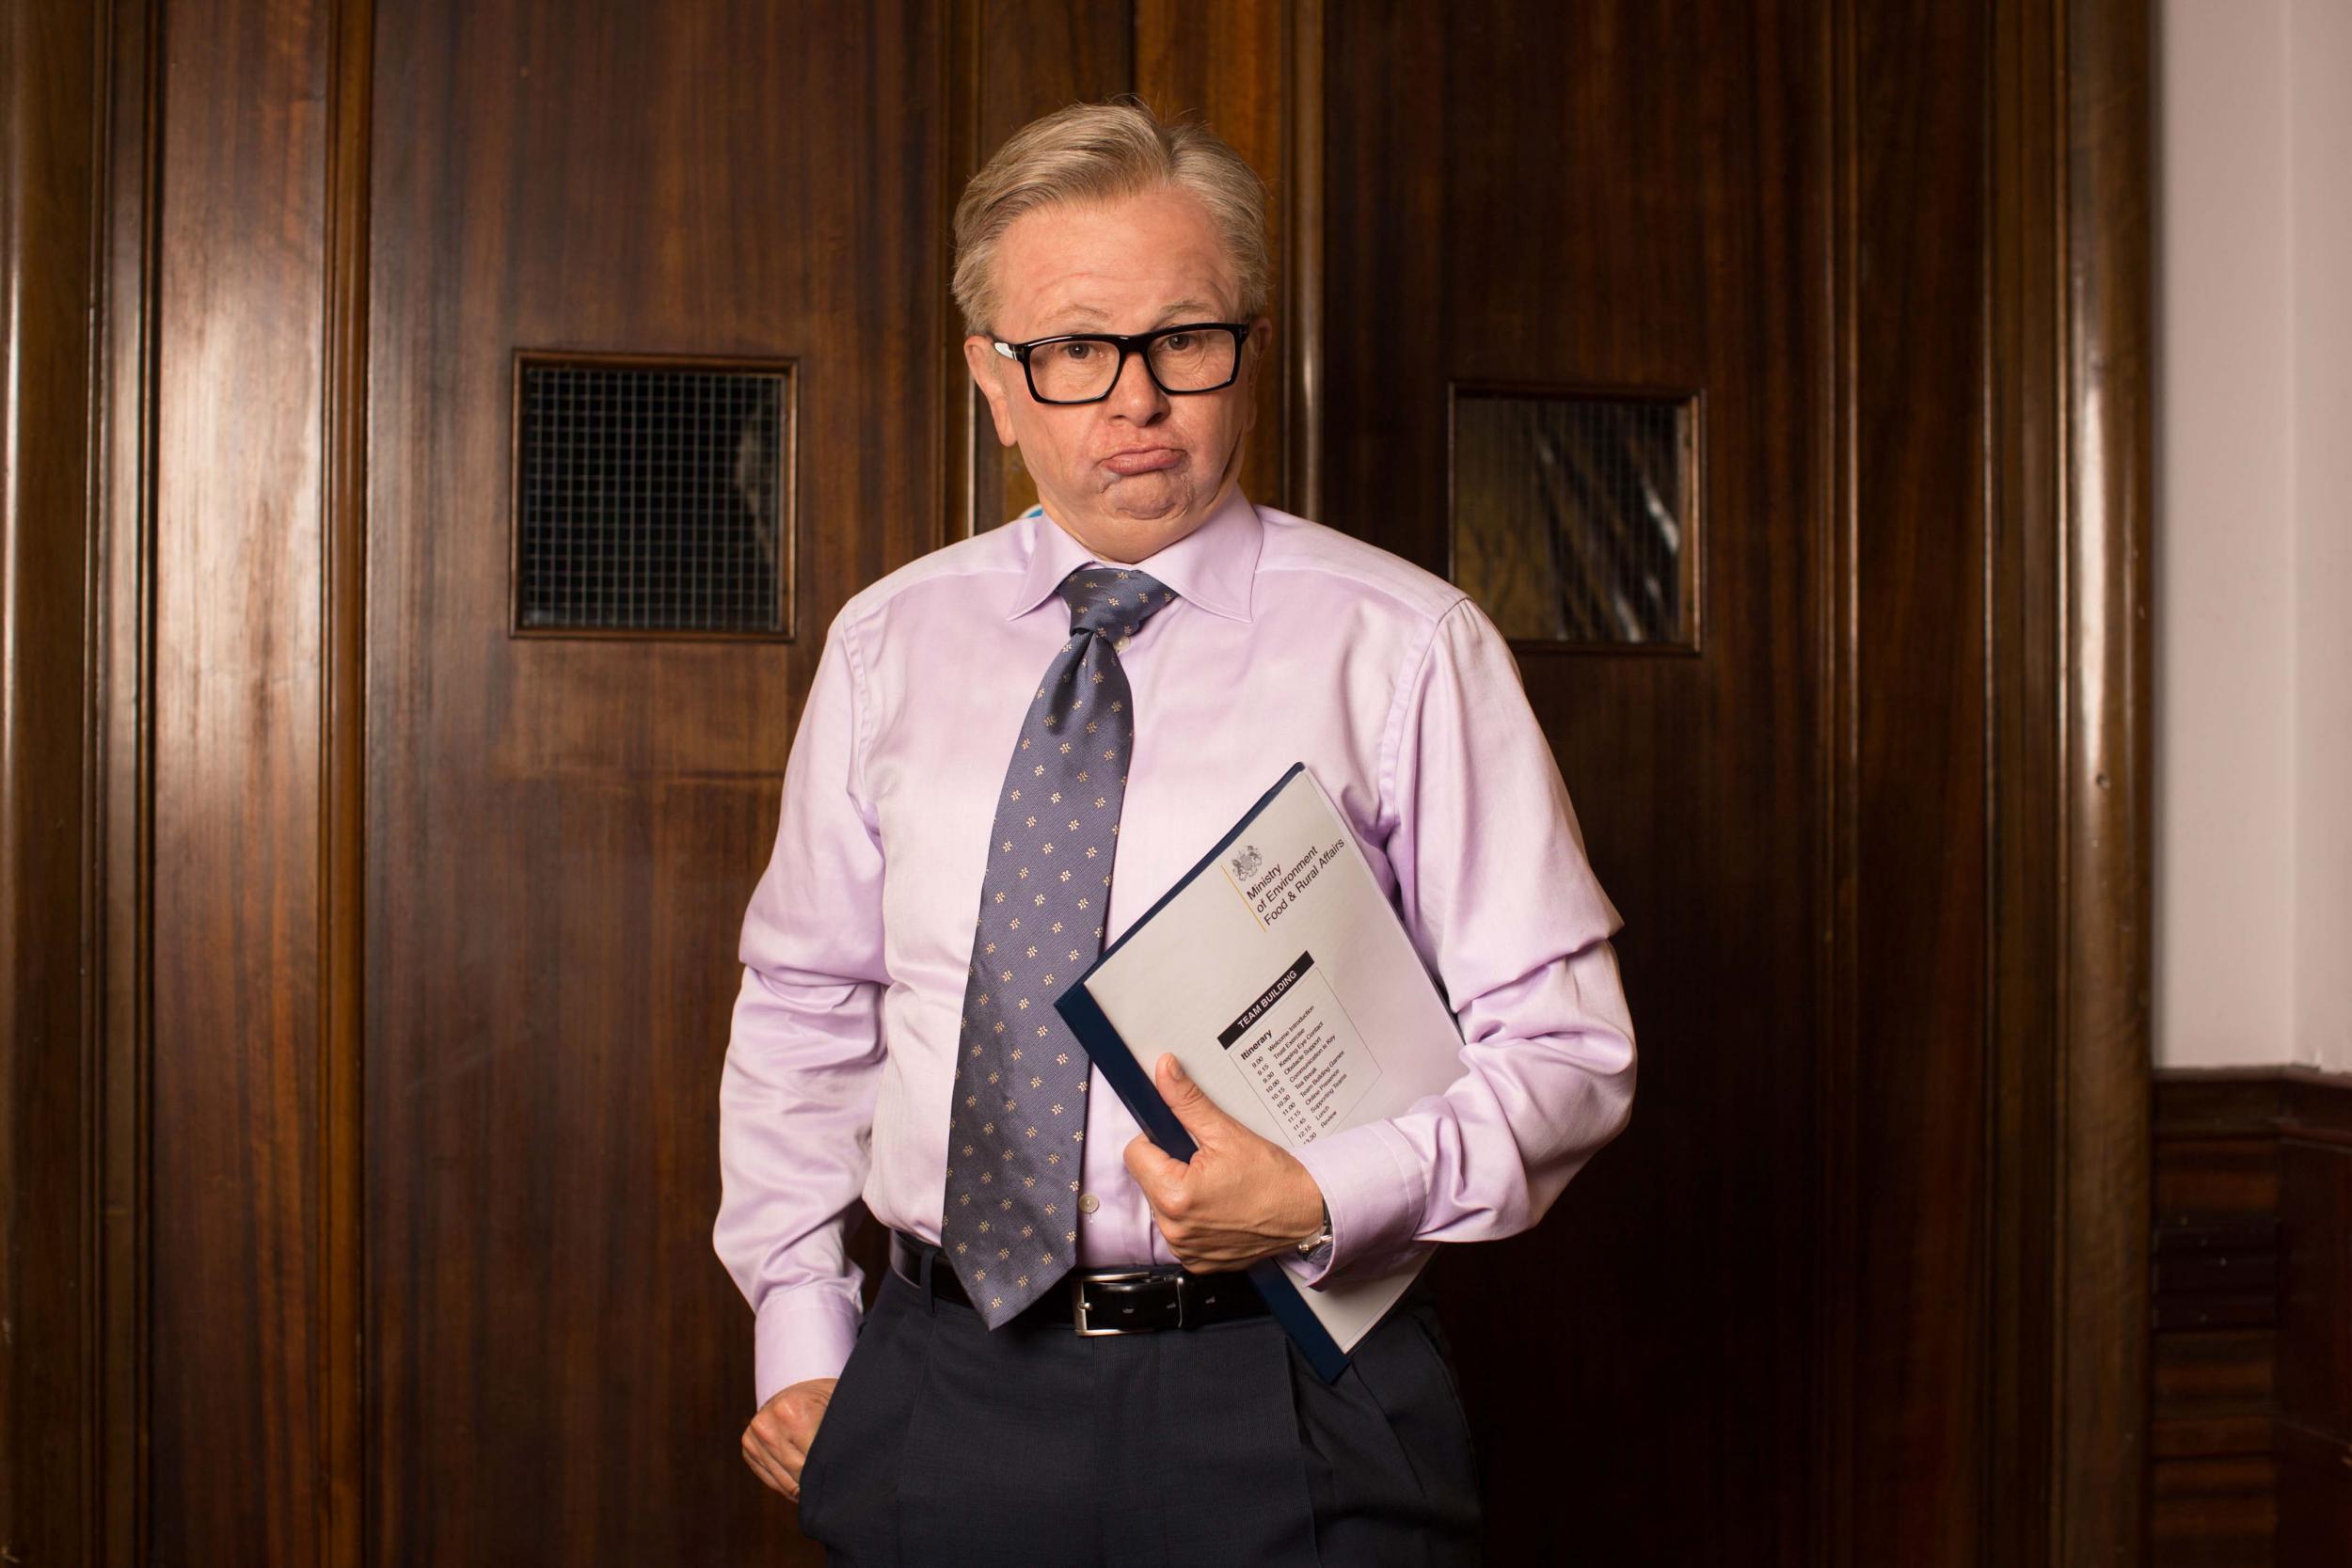 Tracey Ullman assumes the form of Michael Gove, but can she capture his nuances?